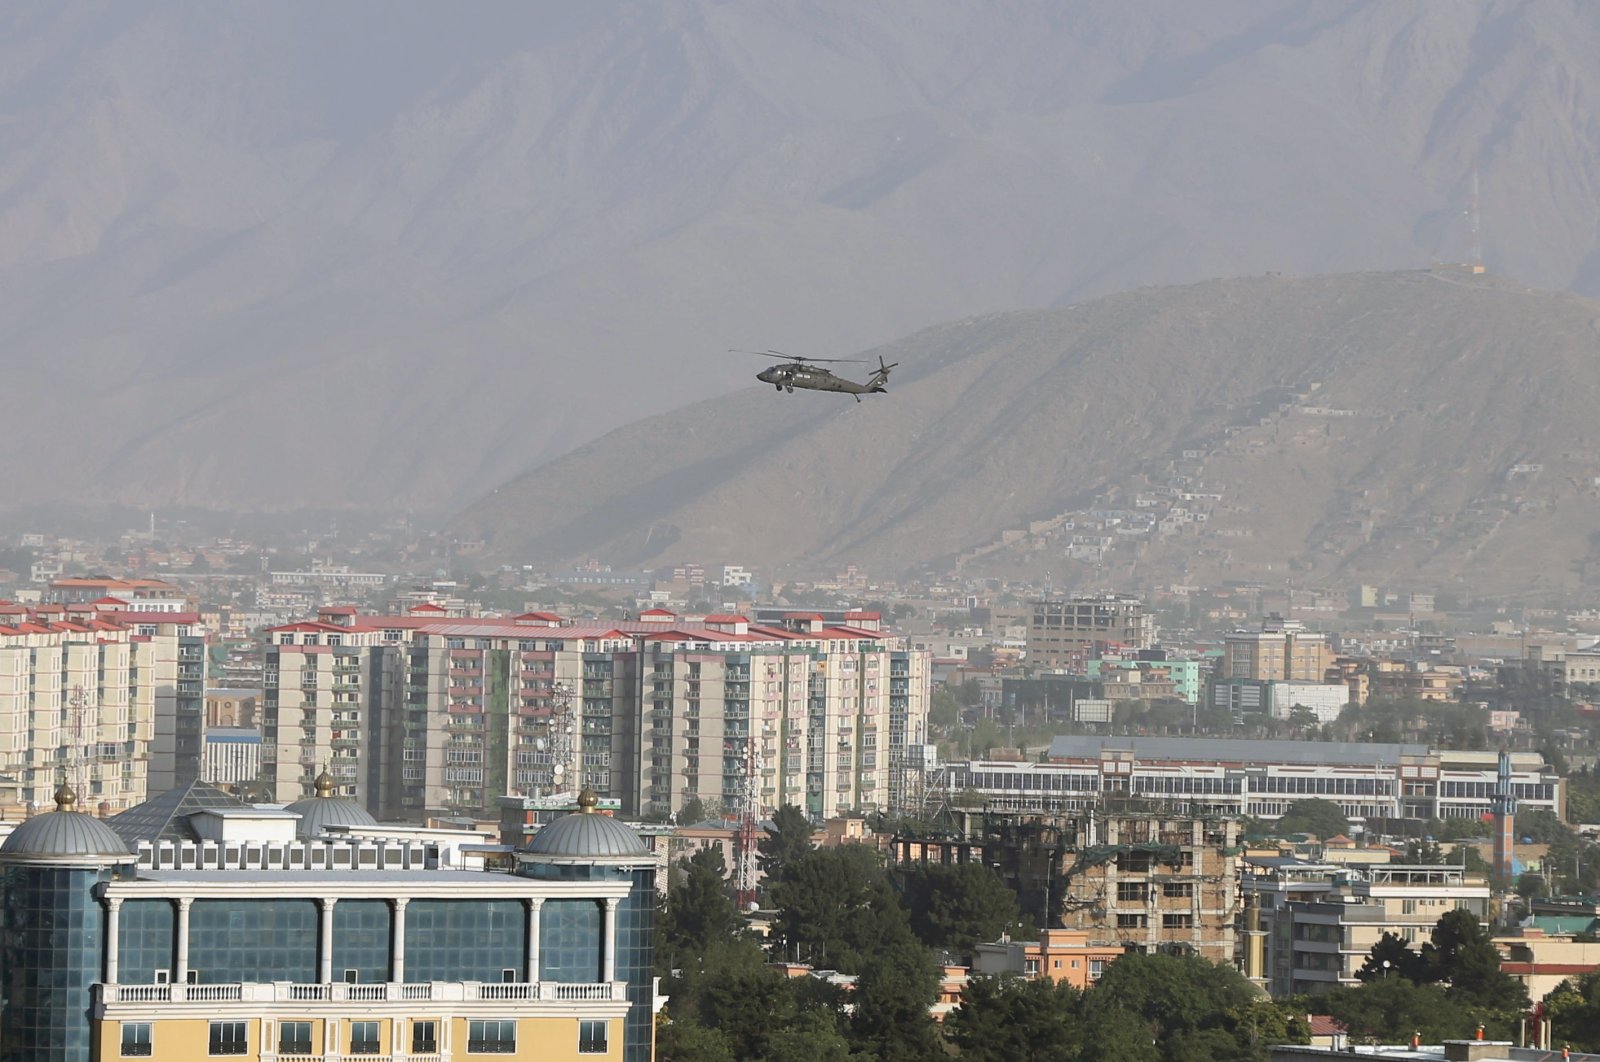 A NATO helicopter flies over the city of Kabul, Afghanistan, June 29, 2020. (REUTERS Photo)